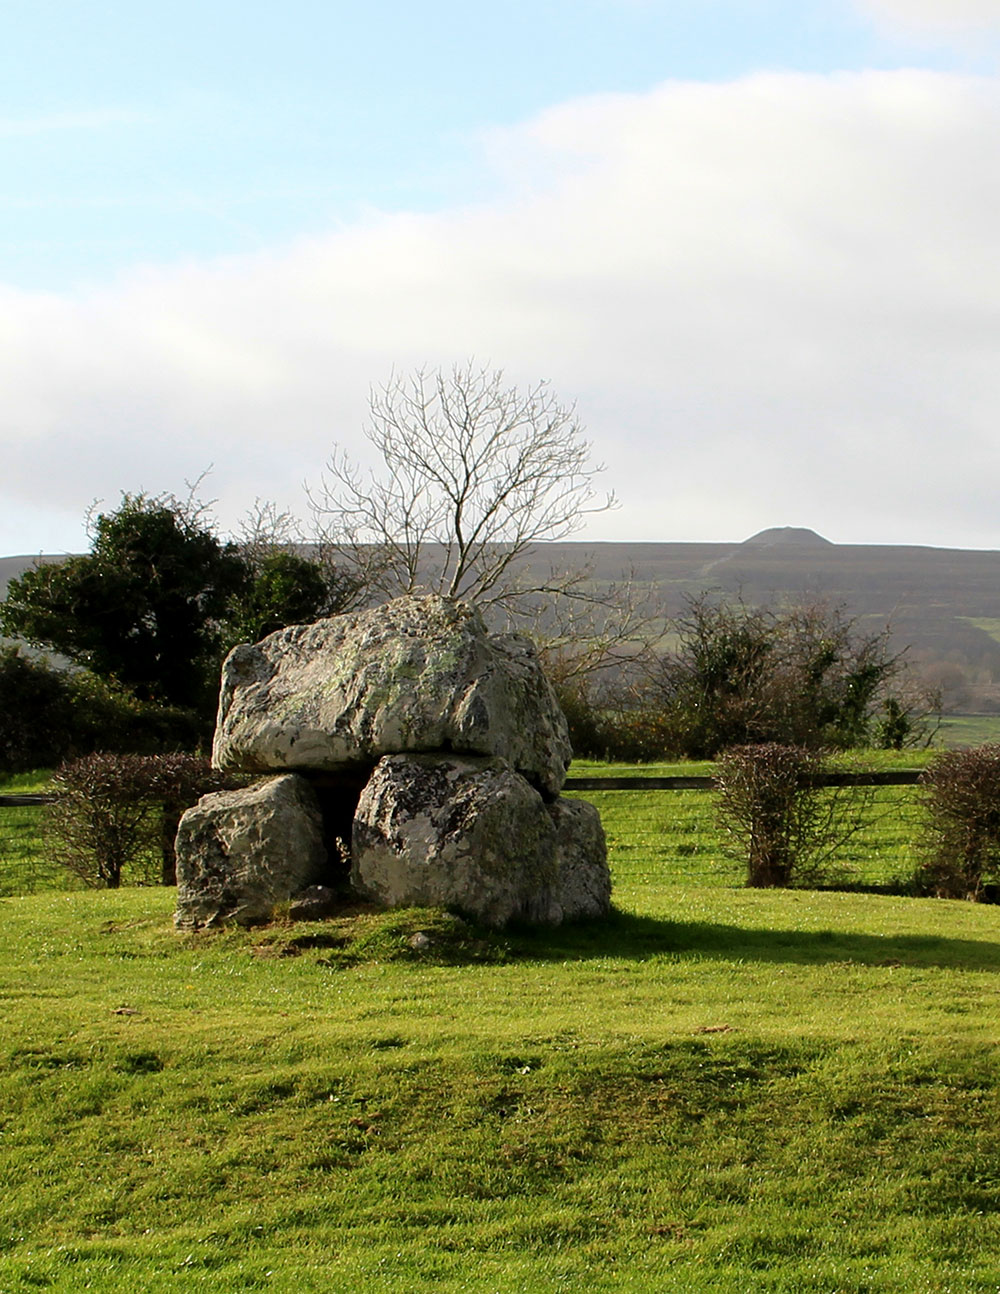 View to Queen Maeve's Cairn from Dolmen 4 at Carrowmore.